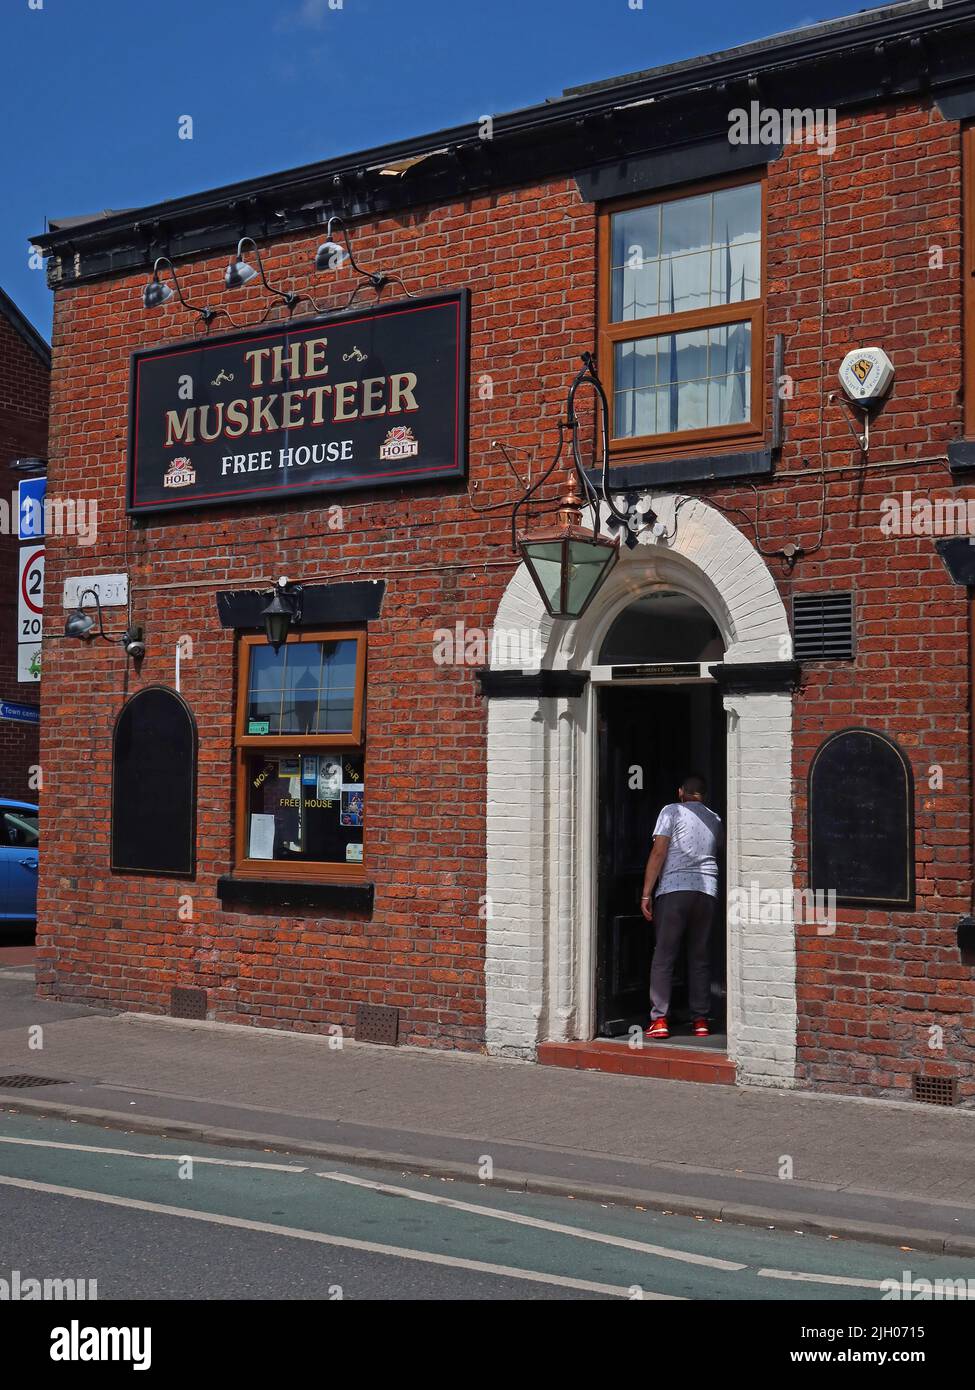 The Musketeer, Holt Free House, pub, 15 Lord St, Leigh, Wigan, Lancs, Angleterre, Royaume-Uni, WN7 1AB Banque D'Images